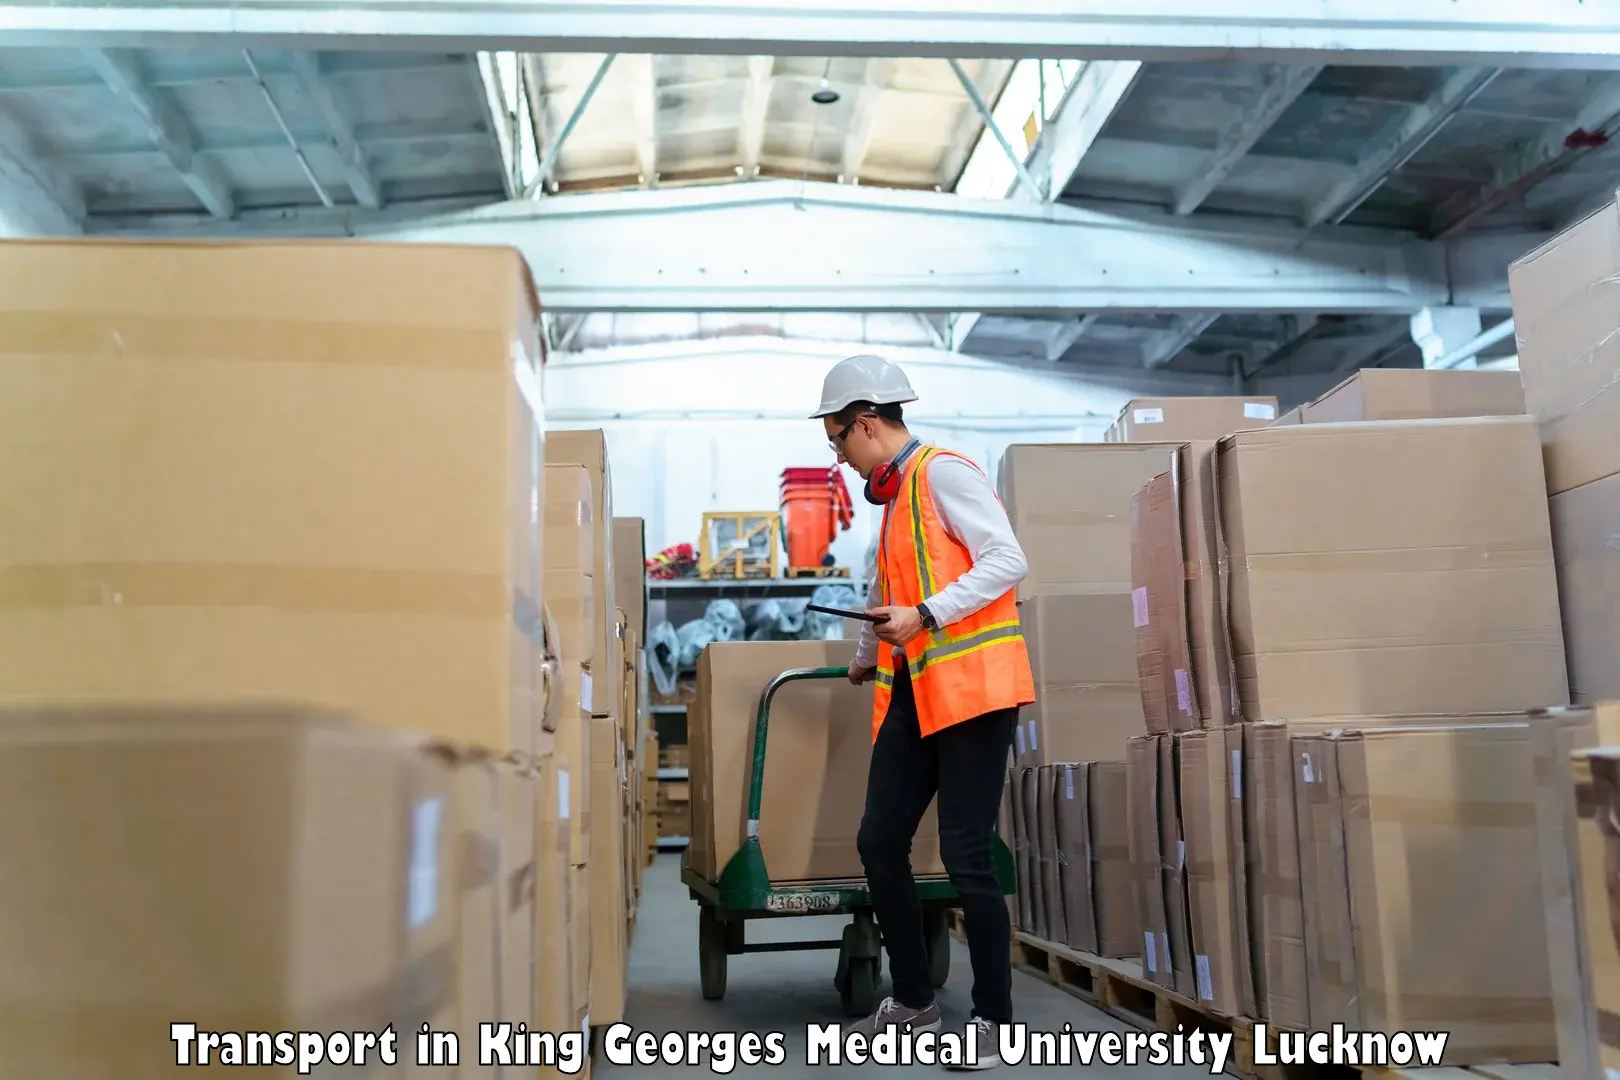 Domestic transport services in King Georges Medical University Lucknow